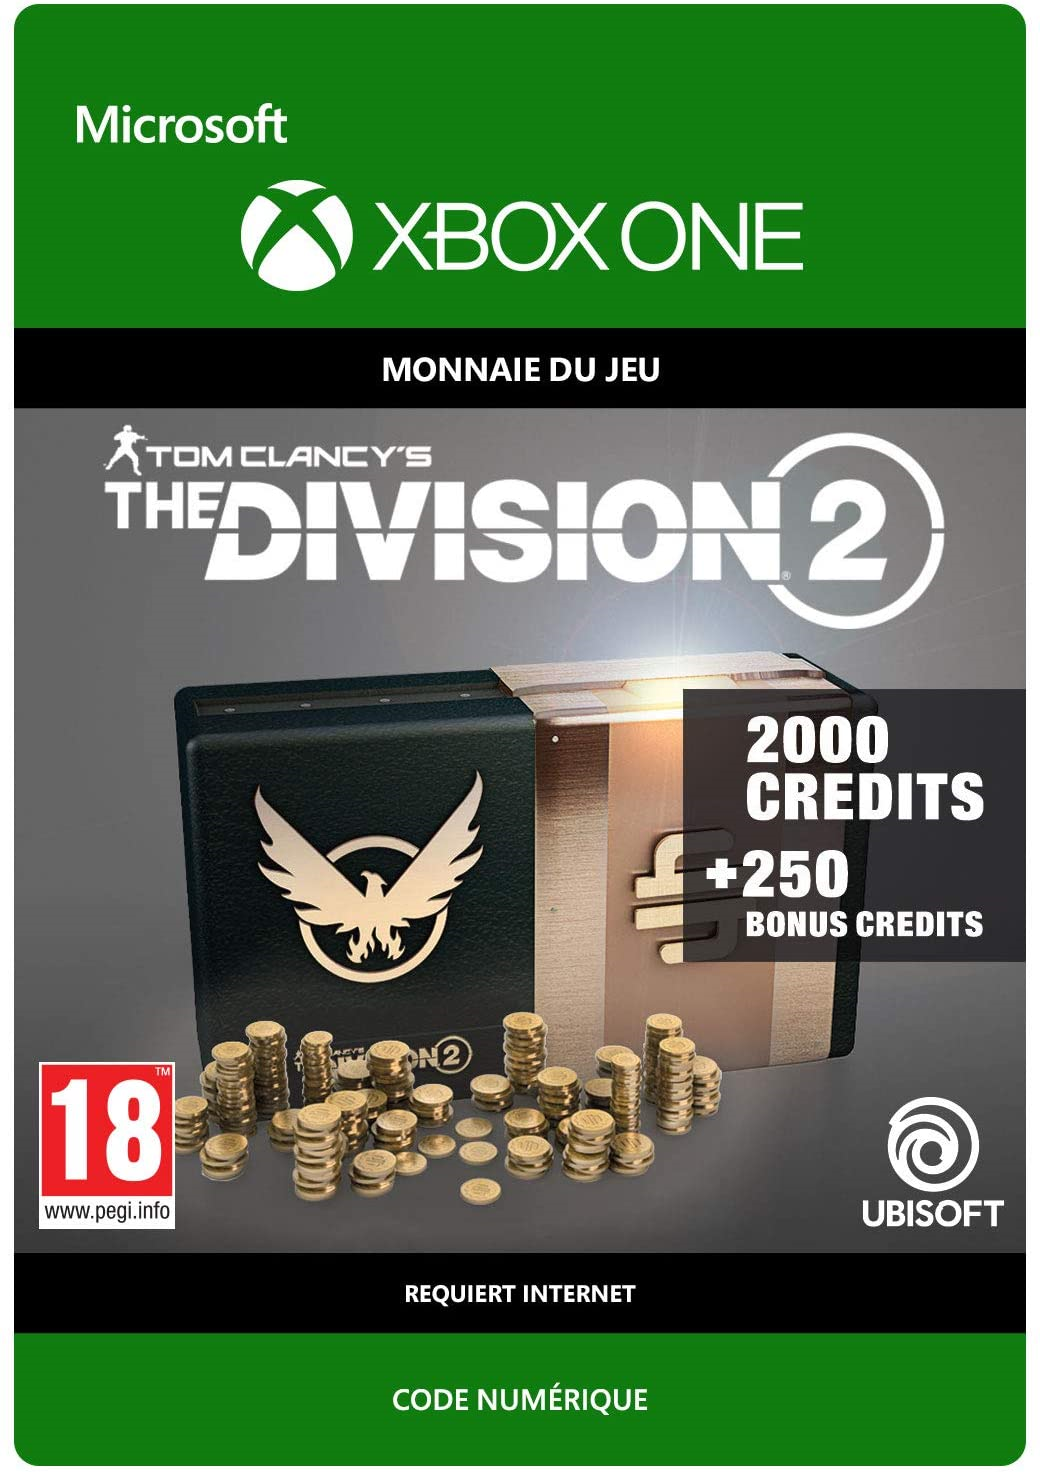 Tom Clancy's The Division 2 - 2250 Premium Credits Pack